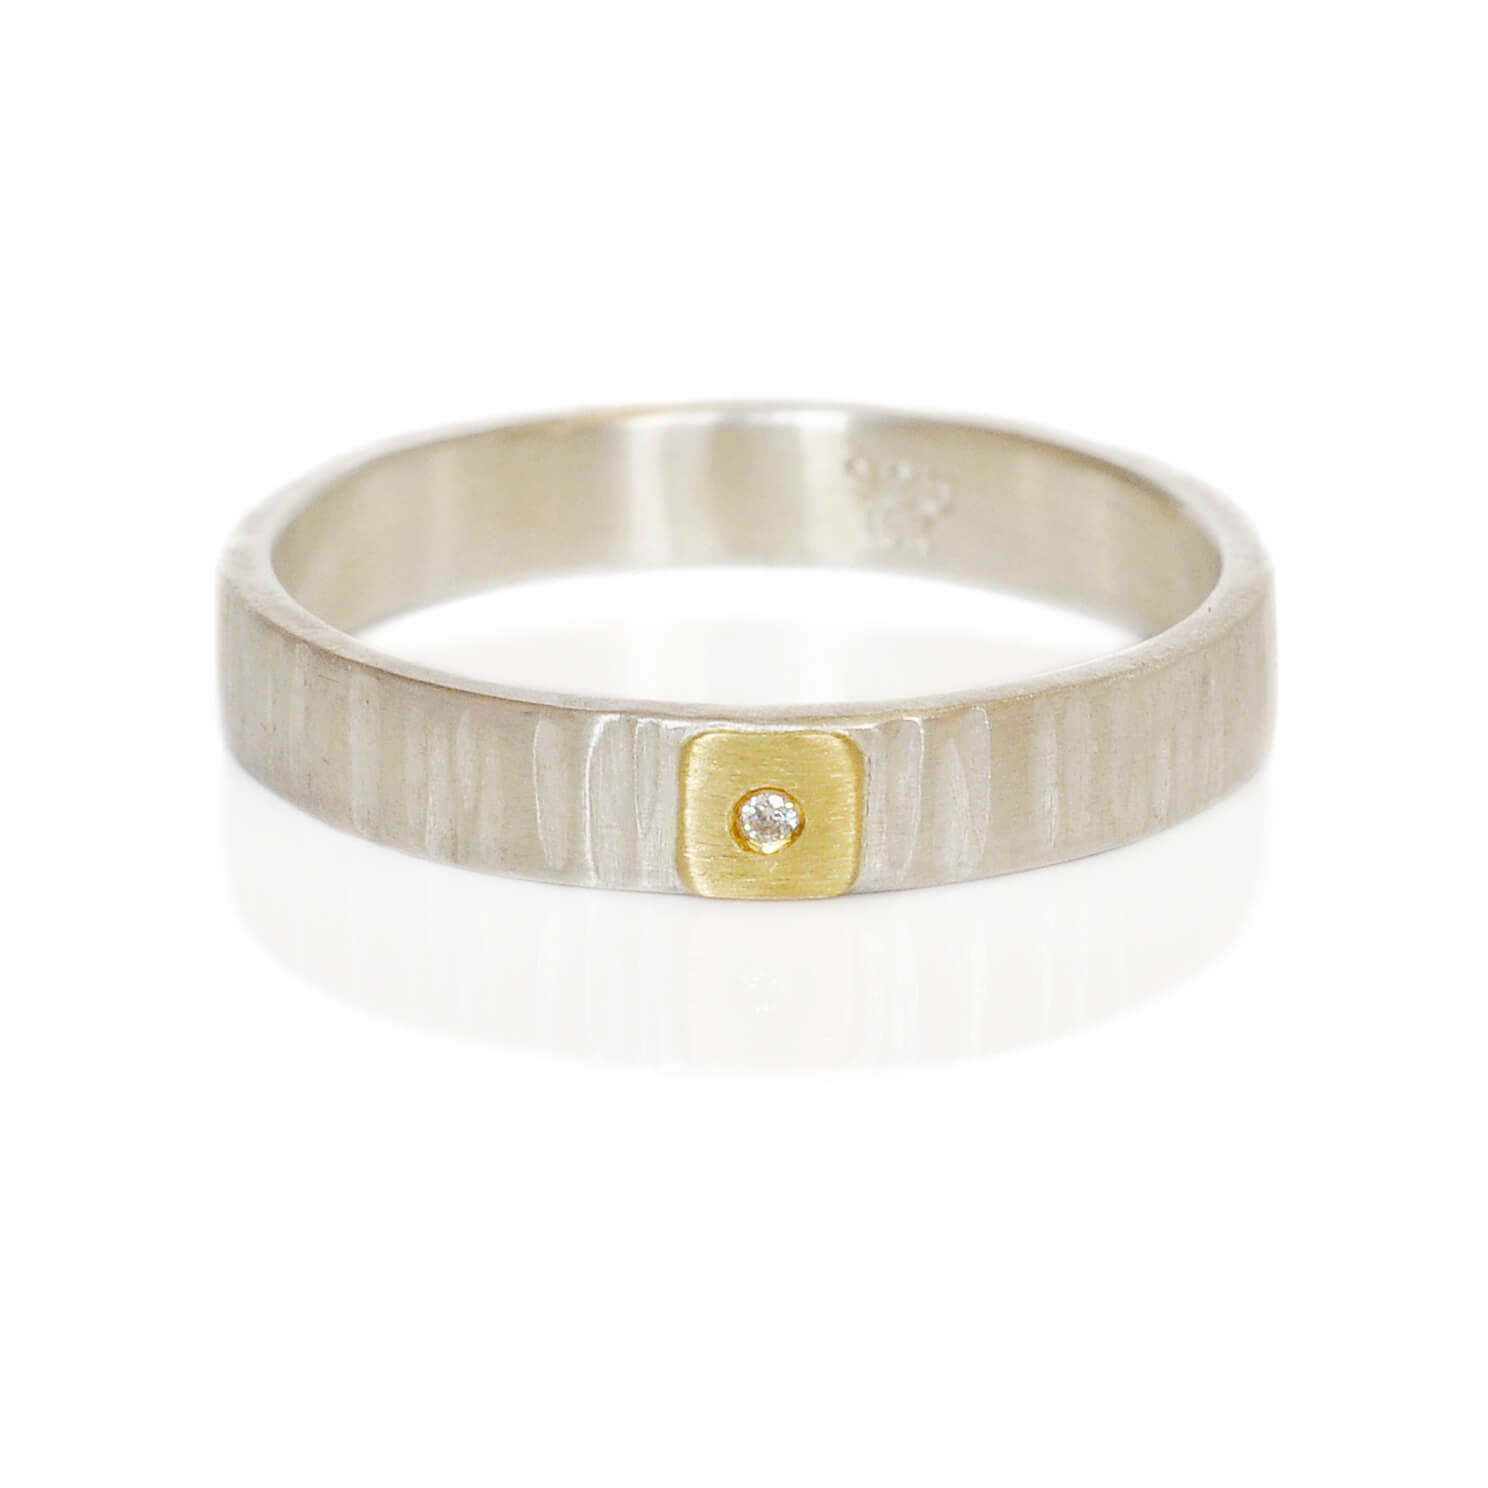 Diamond wedding band in linear hammered silver and yellow gold. Handmade by EC Design in Minneapolis, MN using recycled metal.